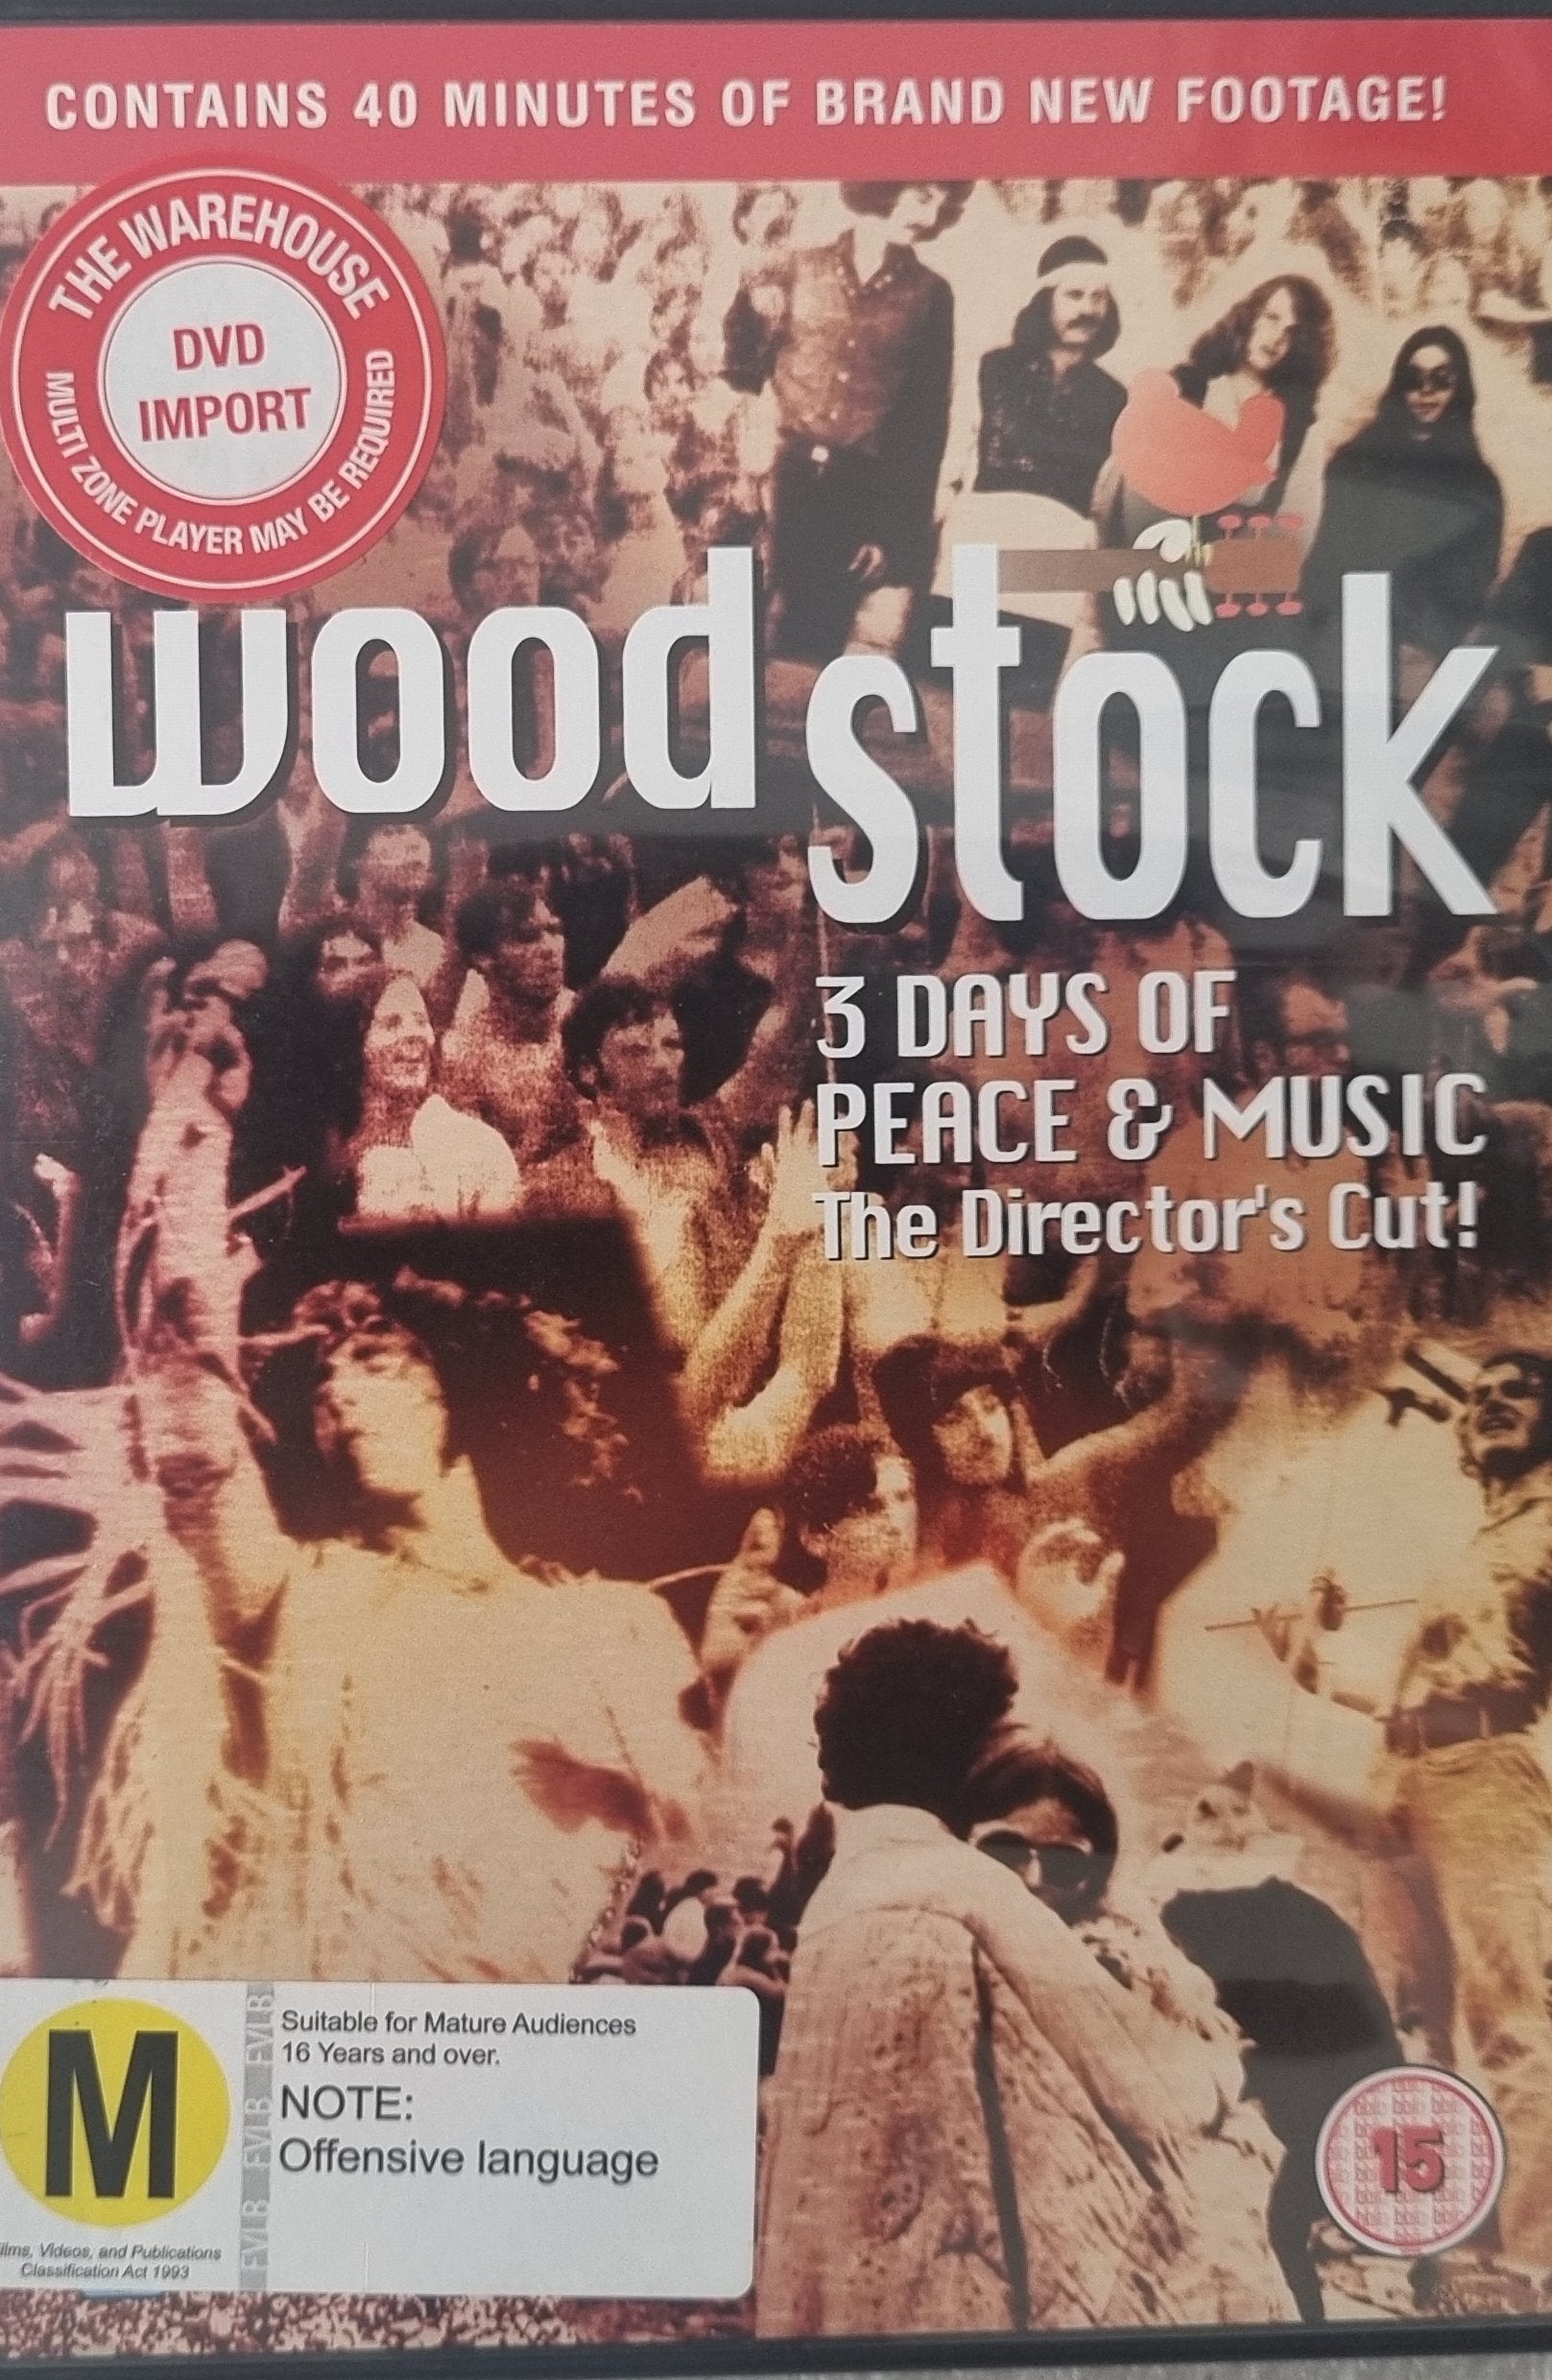 Woodstock - 3 Days of Peace and Music (Director's Cut)